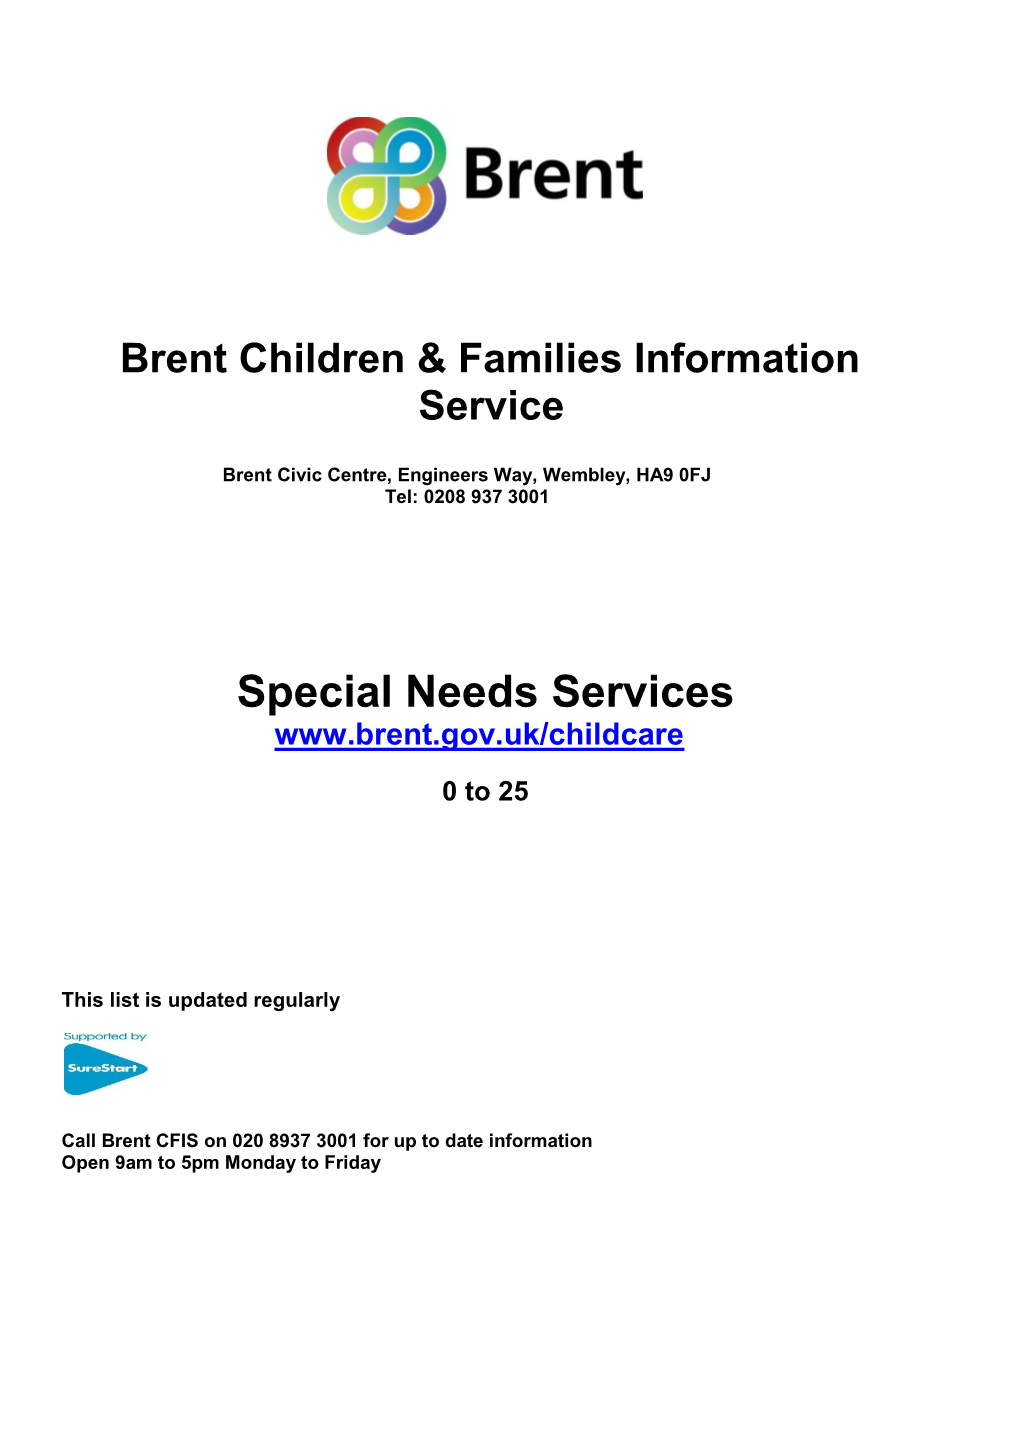 Special Needs Services